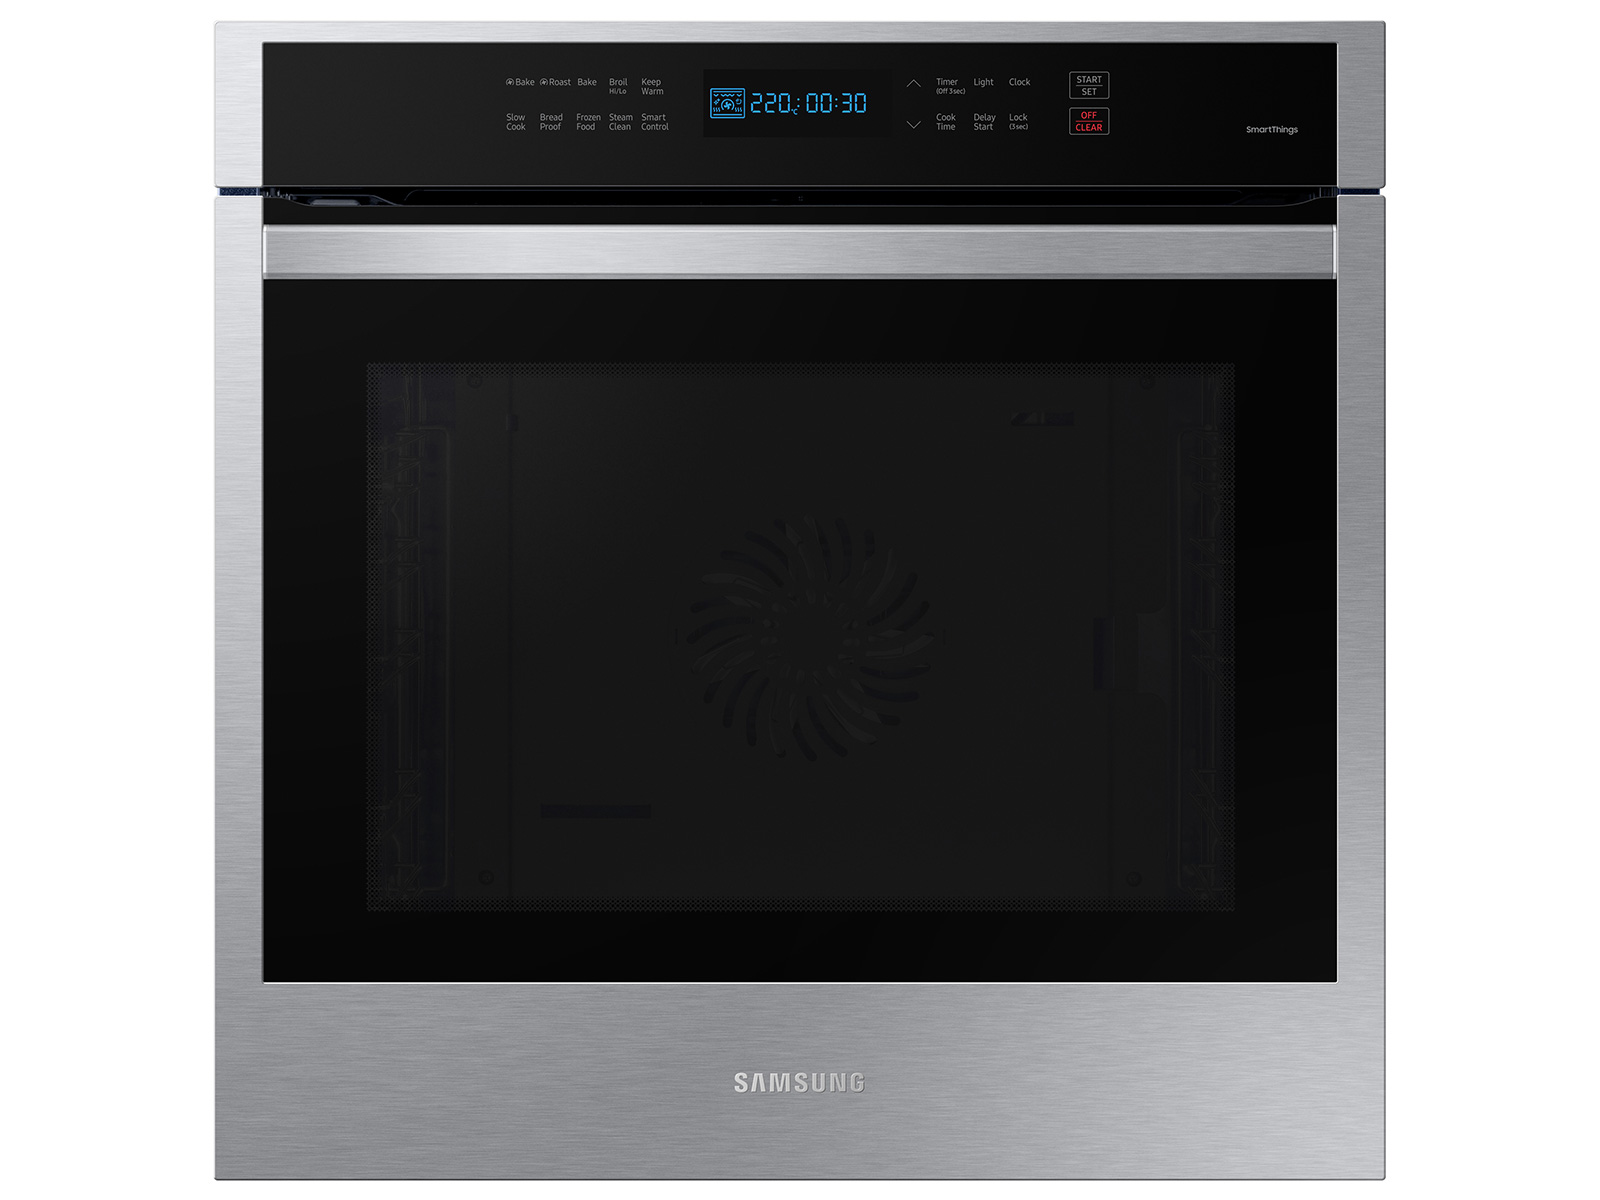 Samsung 24" 3.1 cu. ft. Single Electric Wall Oven with Convection and Wi-Fi in Stainless Steel(NV31T4551SS/AA)